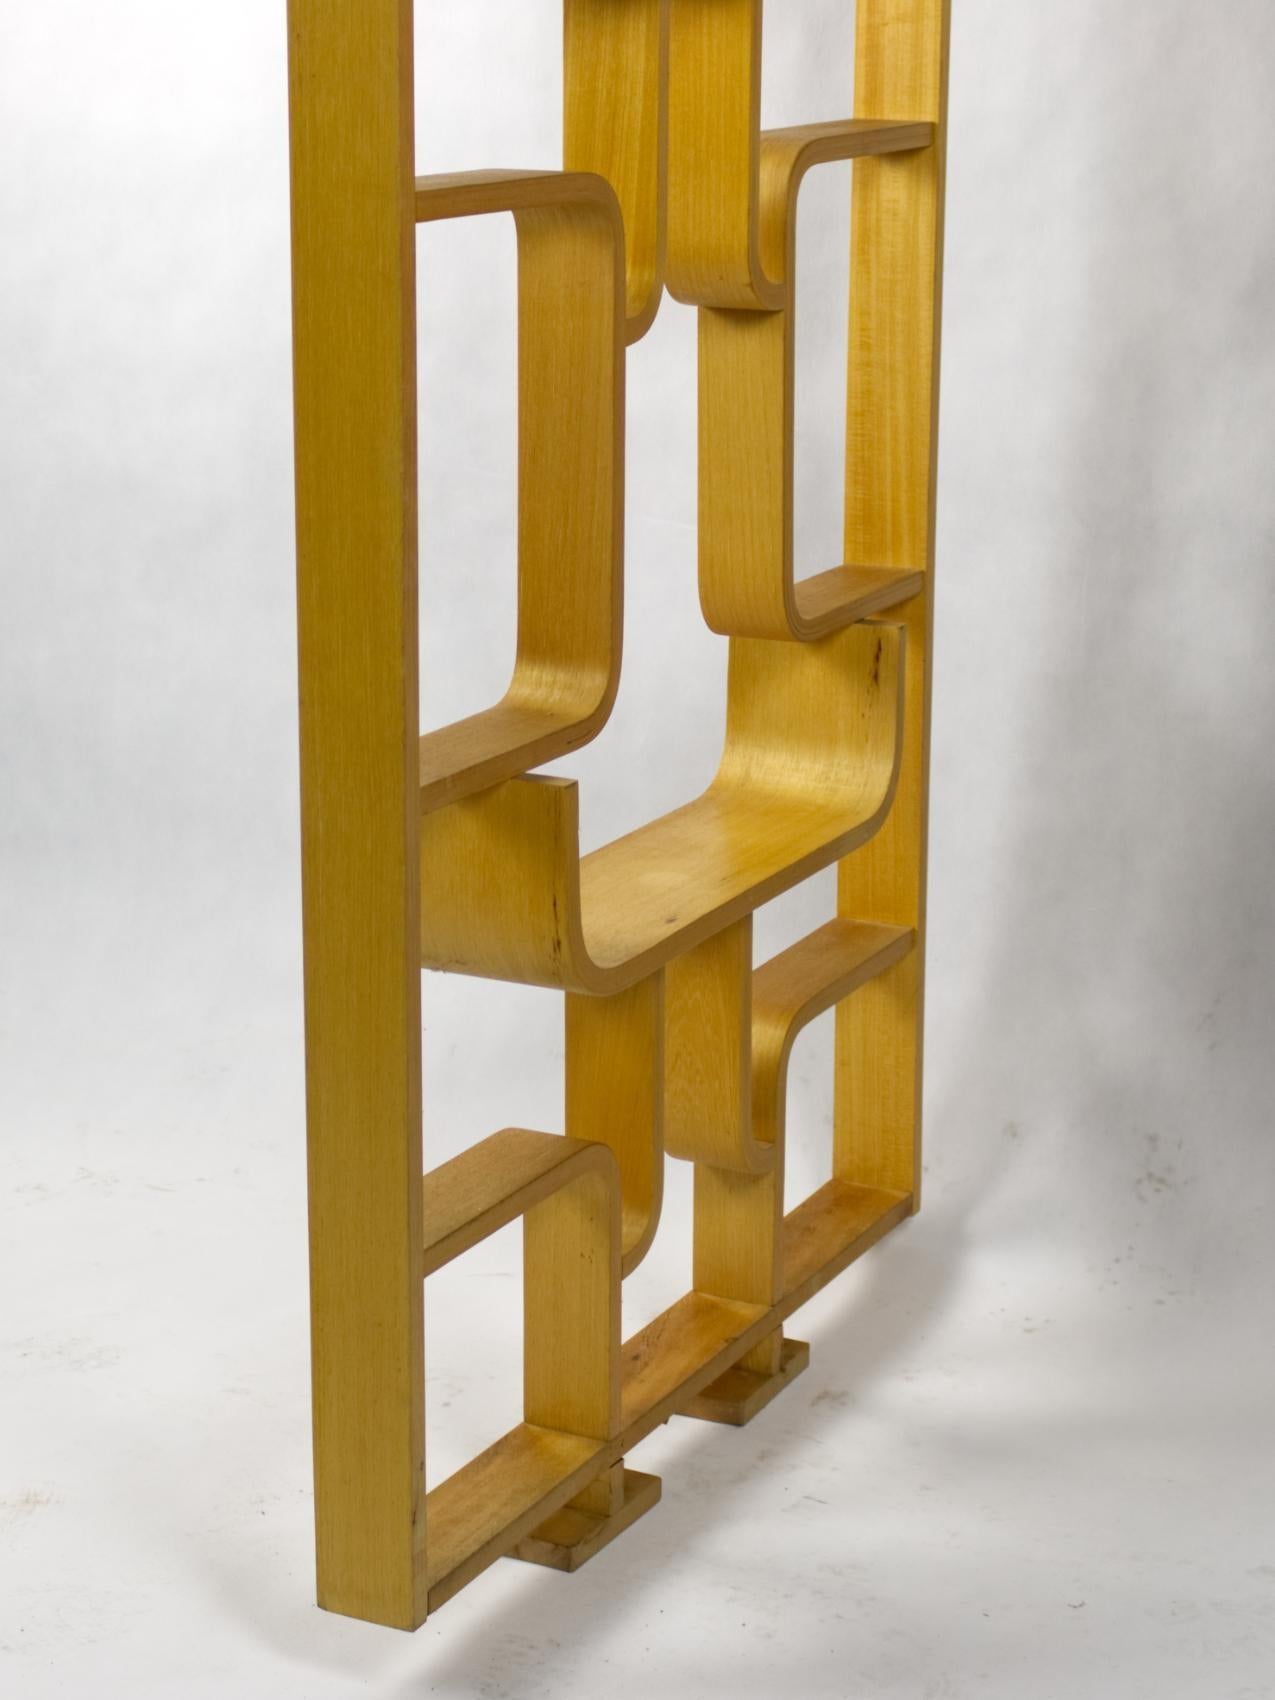 Midcentury wall divider designed by Czech architect, Ludvik Volak and produced by Drevopodnik Holešov in the former Czechoslovakia in the 1960s, made of the bent beech plywood and features geometric patterns. In a good original condition.